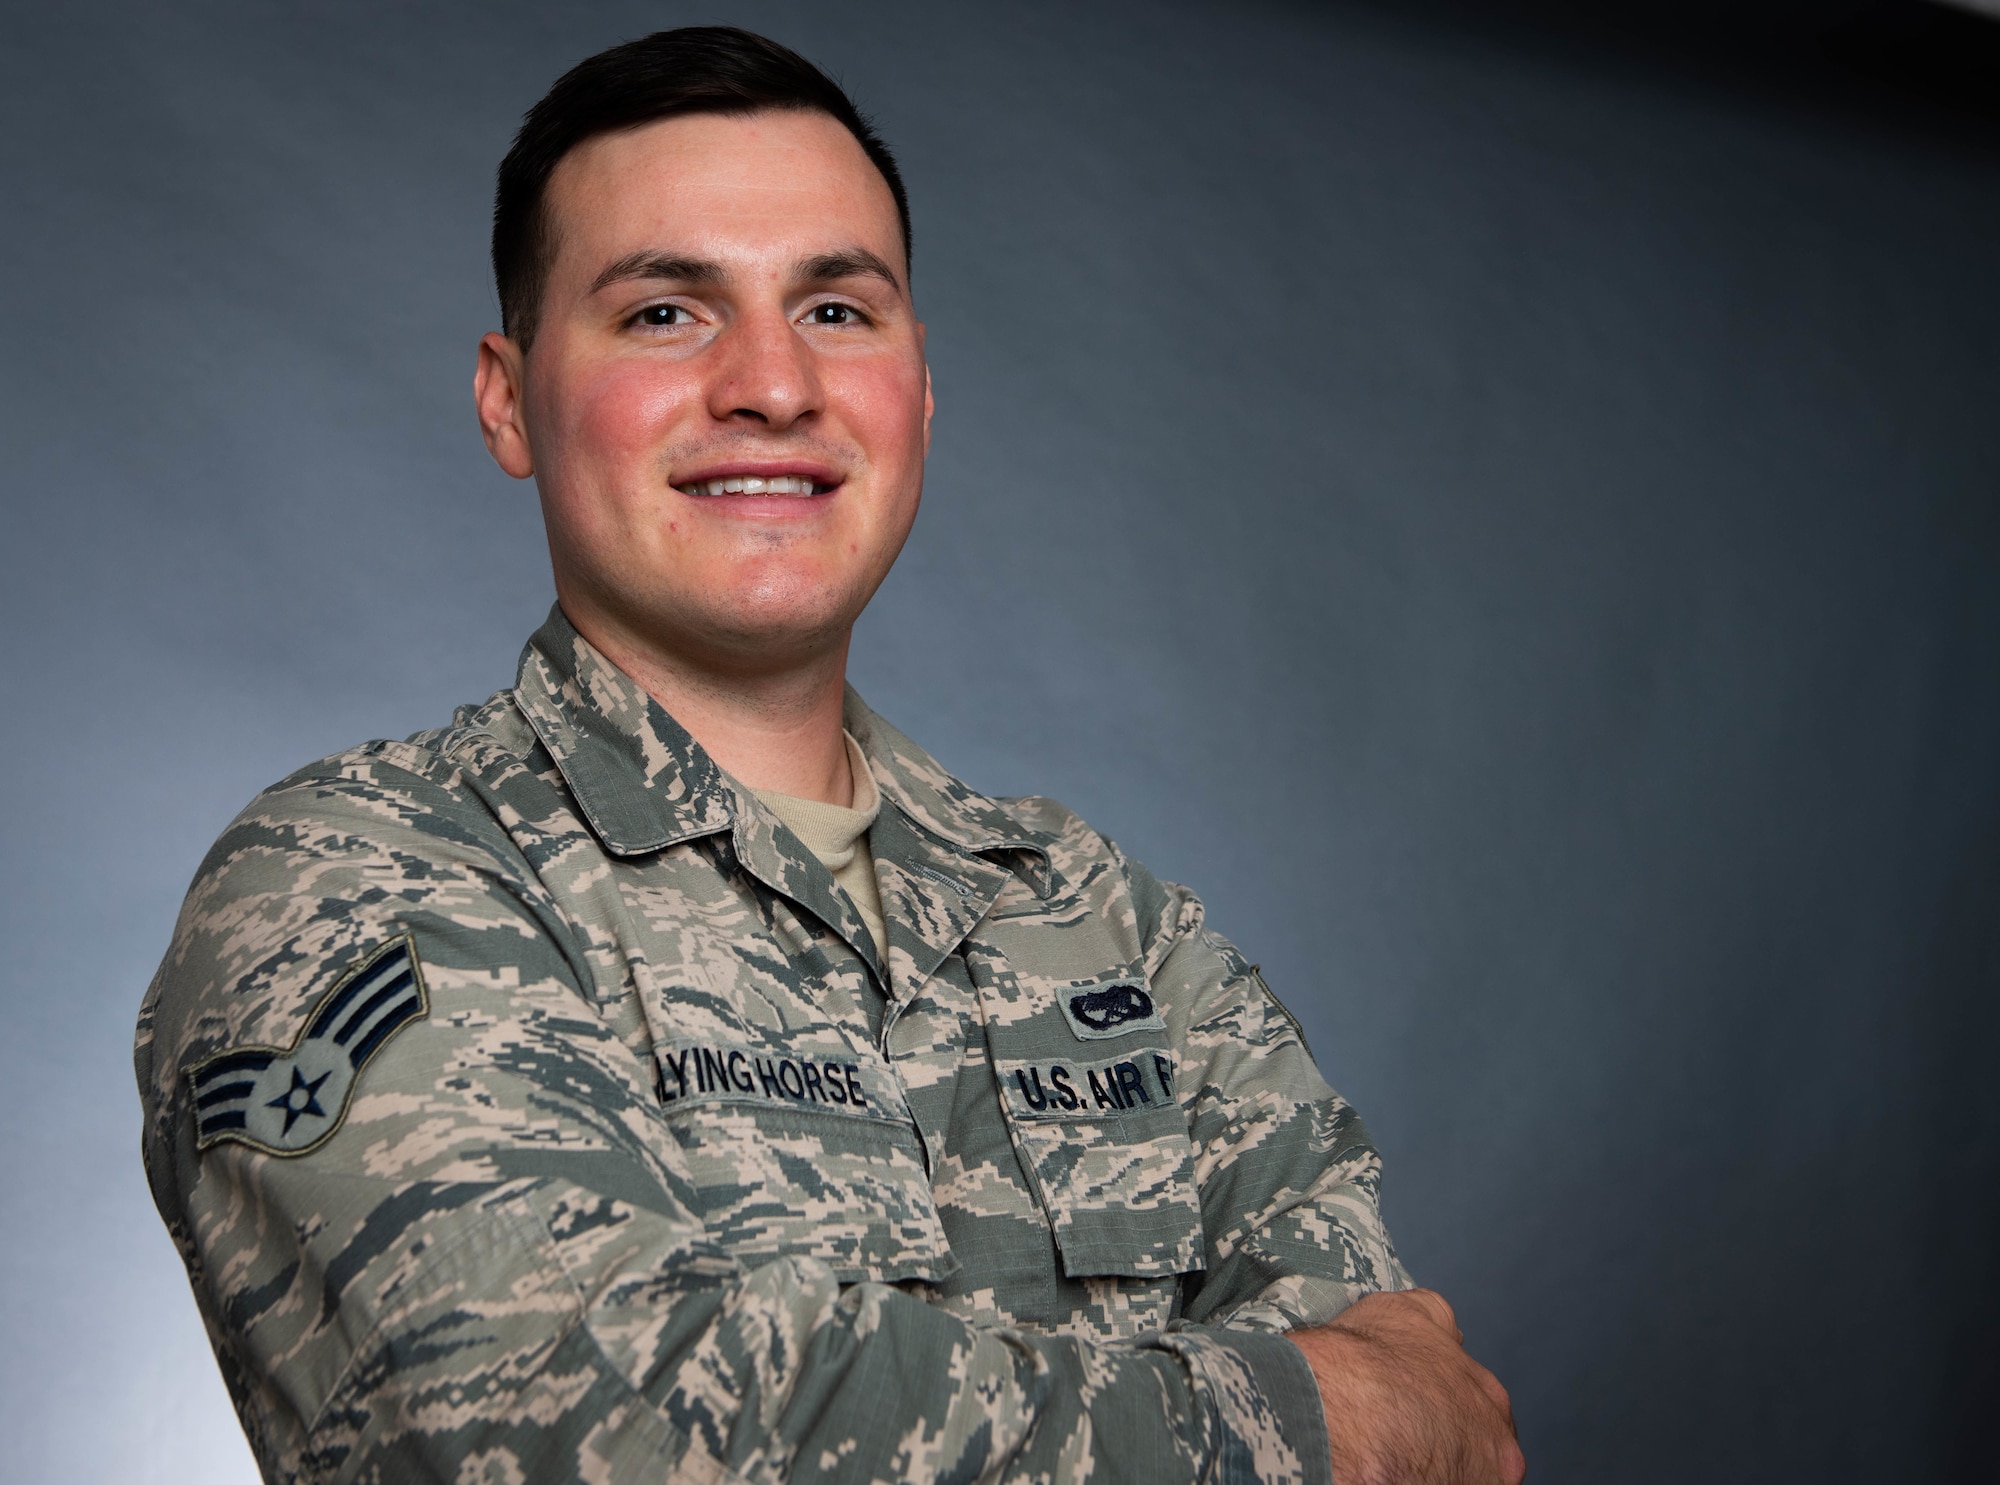 Senior Airman Tristen Flying Horse, 2nd Munitions Squadron stockpile technician, poses for a photo at Barksdale Air Force Base, La., June 29, 2020.